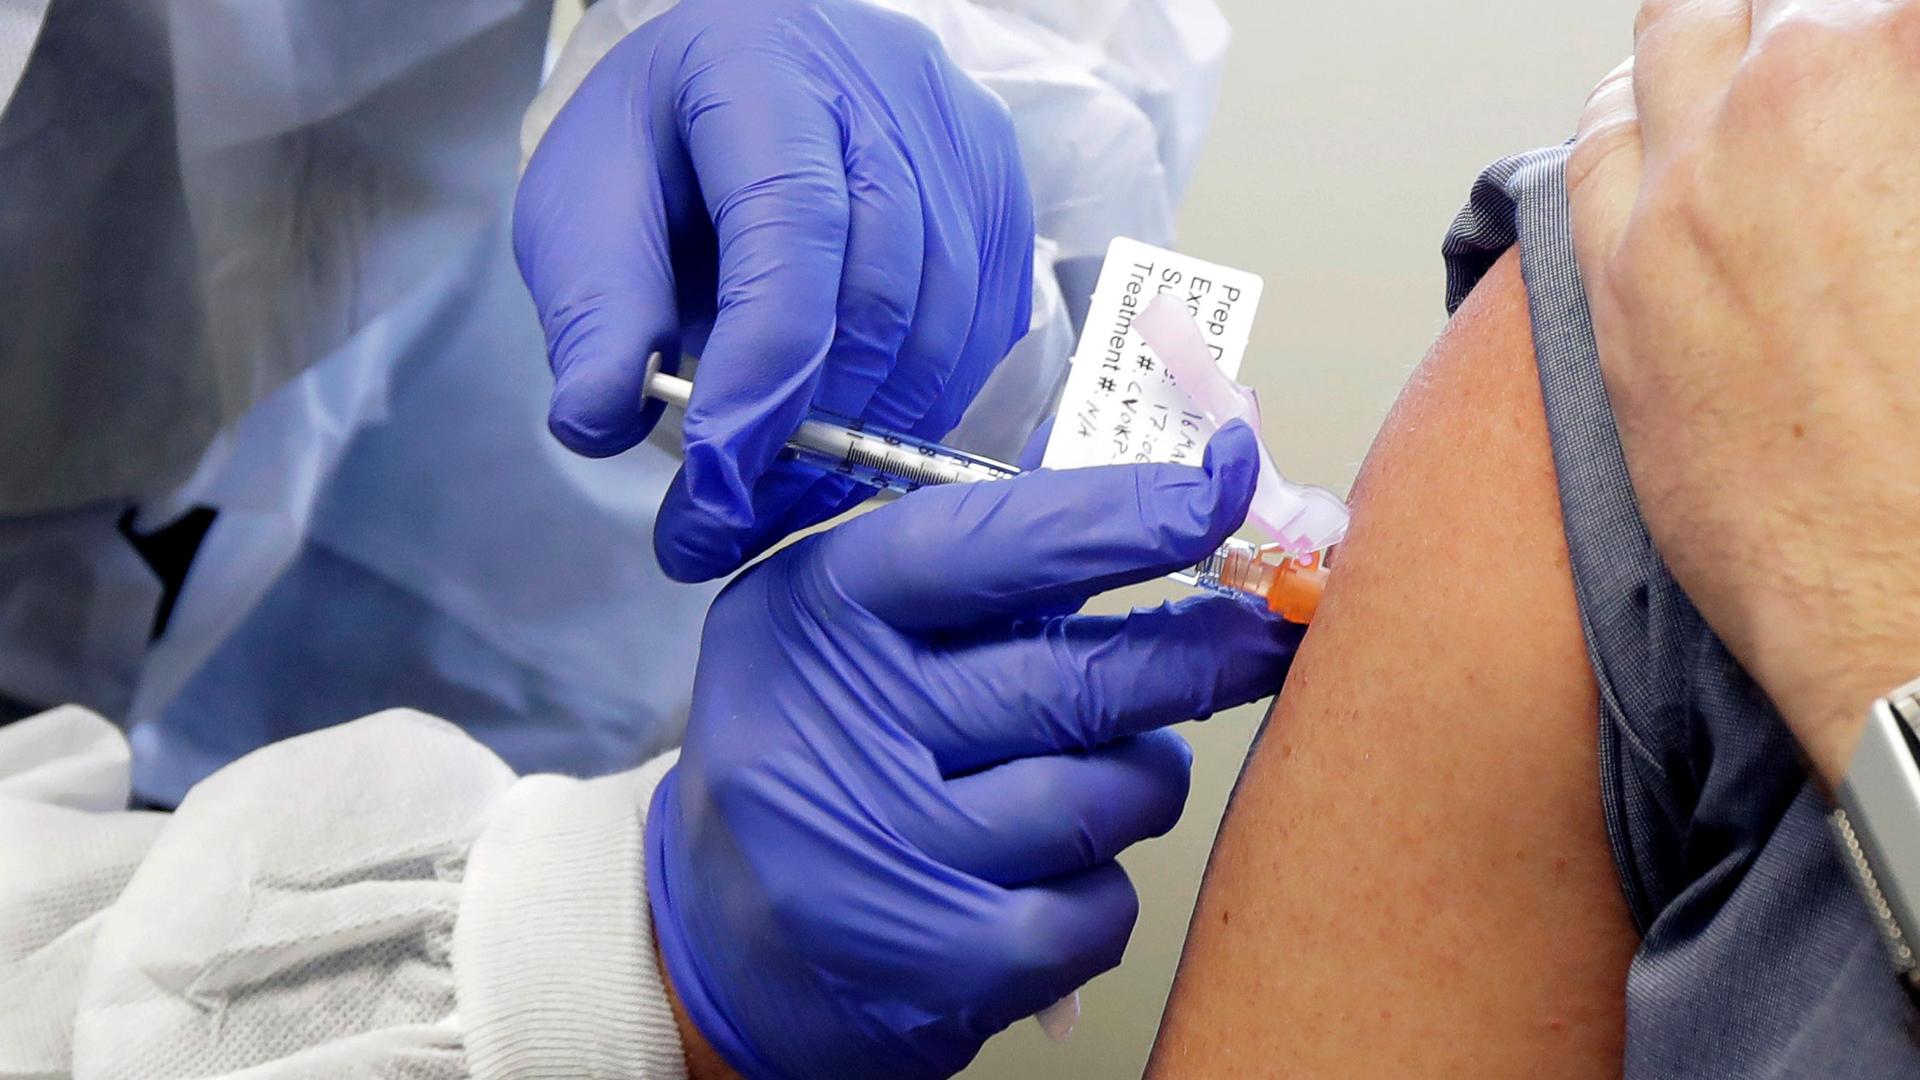 A close-up photograph shows a researcher hearing blue protective gloves and inserting a syringe into the shoulder of a subject.